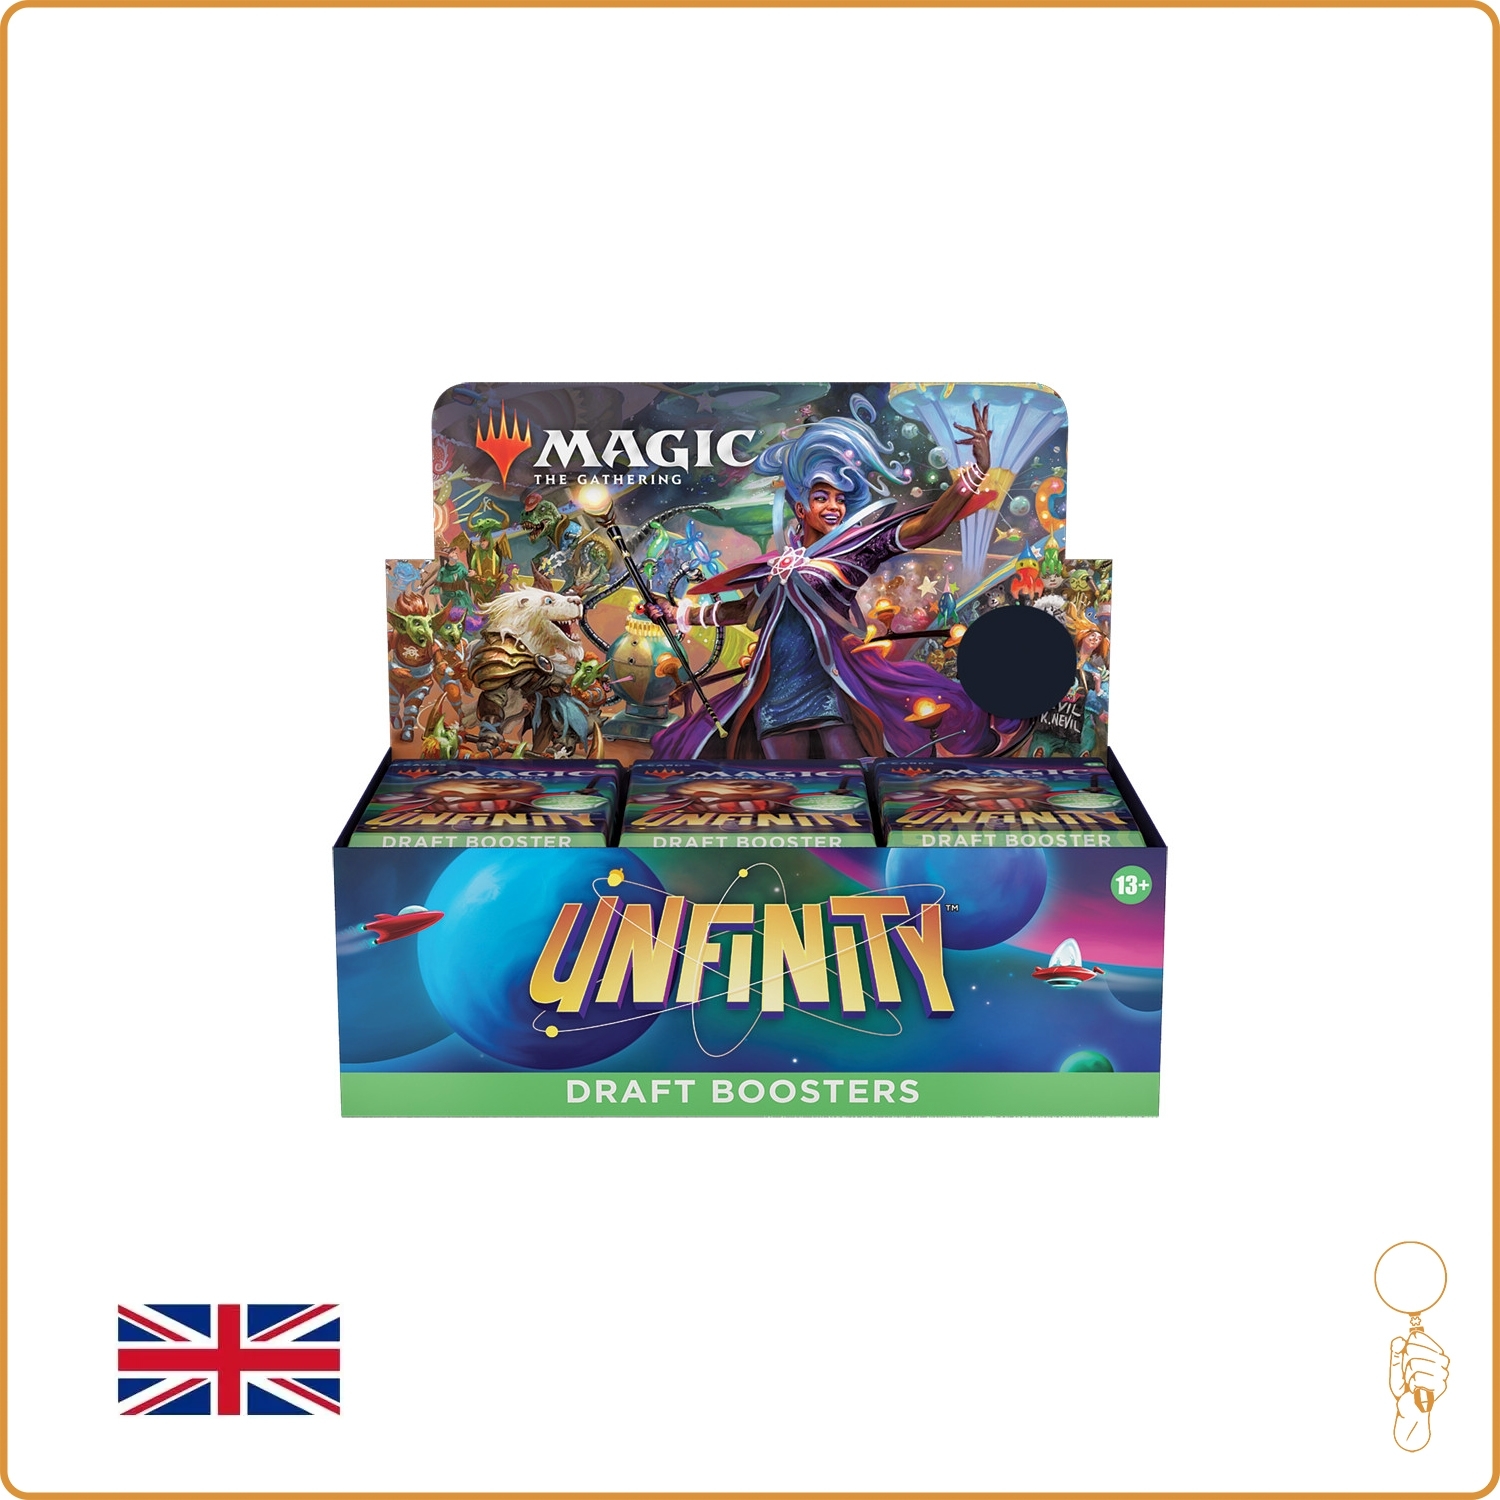 [07-10-2022] Display - Magic the Gathering - Unfinity - 36 boosters de Draft - Scellé - Anglais Wizards of the Coast - 1